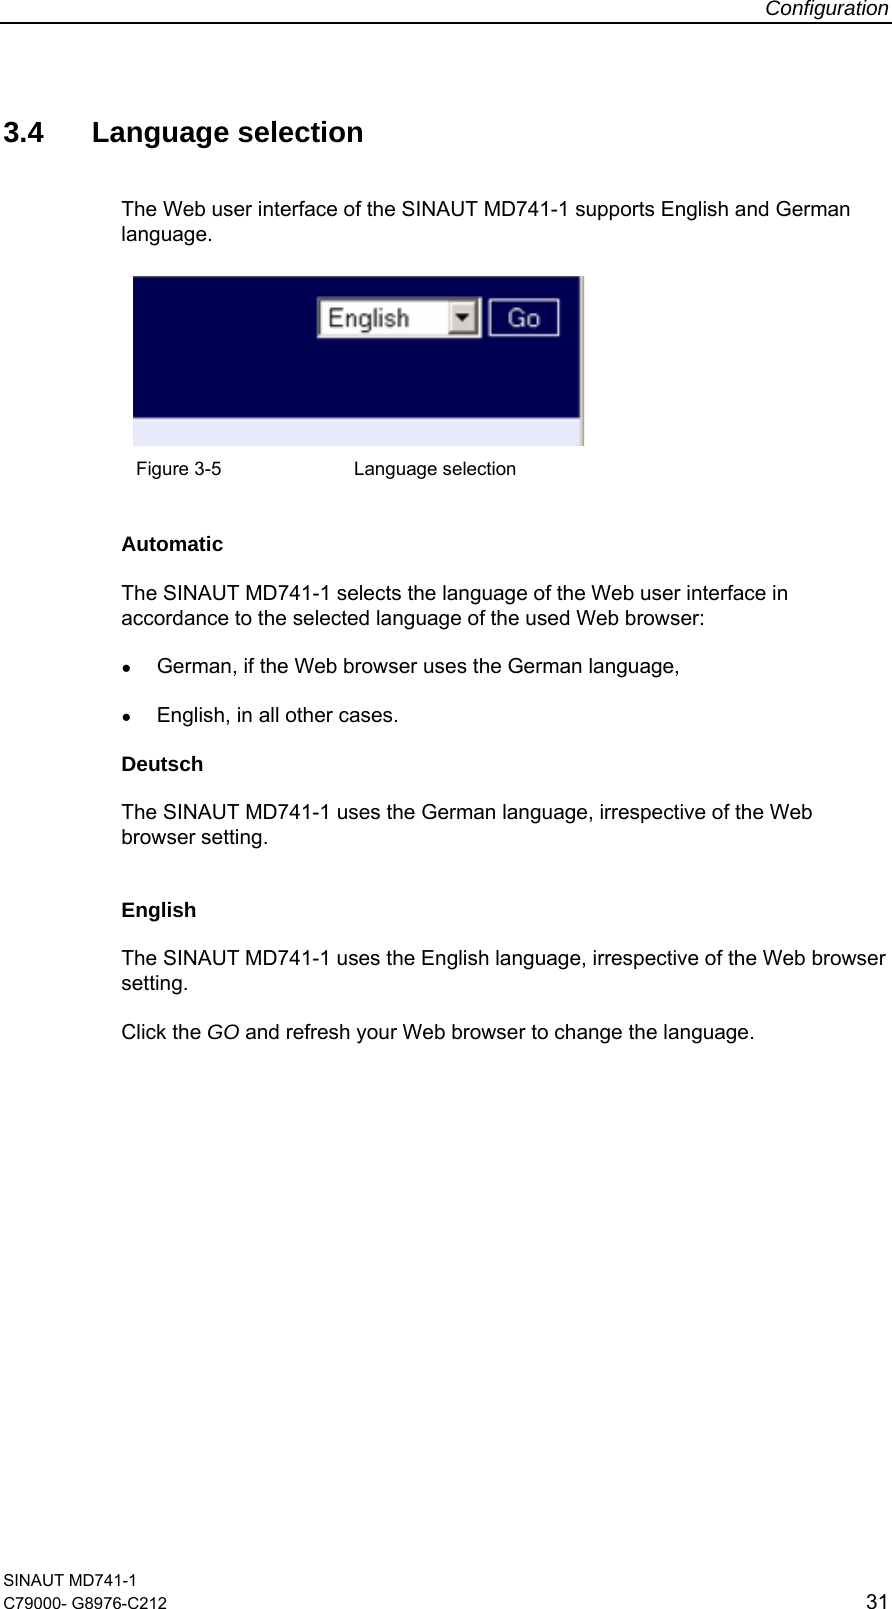 Configuration SINAUT MD741-1 C79000- G8976-C212  31  3.4 Language selection The Web user interface of the SINAUT MD741-1 supports English and German language.     Figure 3-5    Language selection  Automatic The SINAUT MD741-1 selects the language of the Web user interface in accordance to the selected language of the used Web browser: ● German, if the Web browser uses the German language, ● English, in all other cases. Deutsch The SINAUT MD741-1 uses the German language, irrespective of the Web browser setting.  English The SINAUT MD741-1 uses the English language, irrespective of the Web browser setting. Click the GO and refresh your Web browser to change the language.  